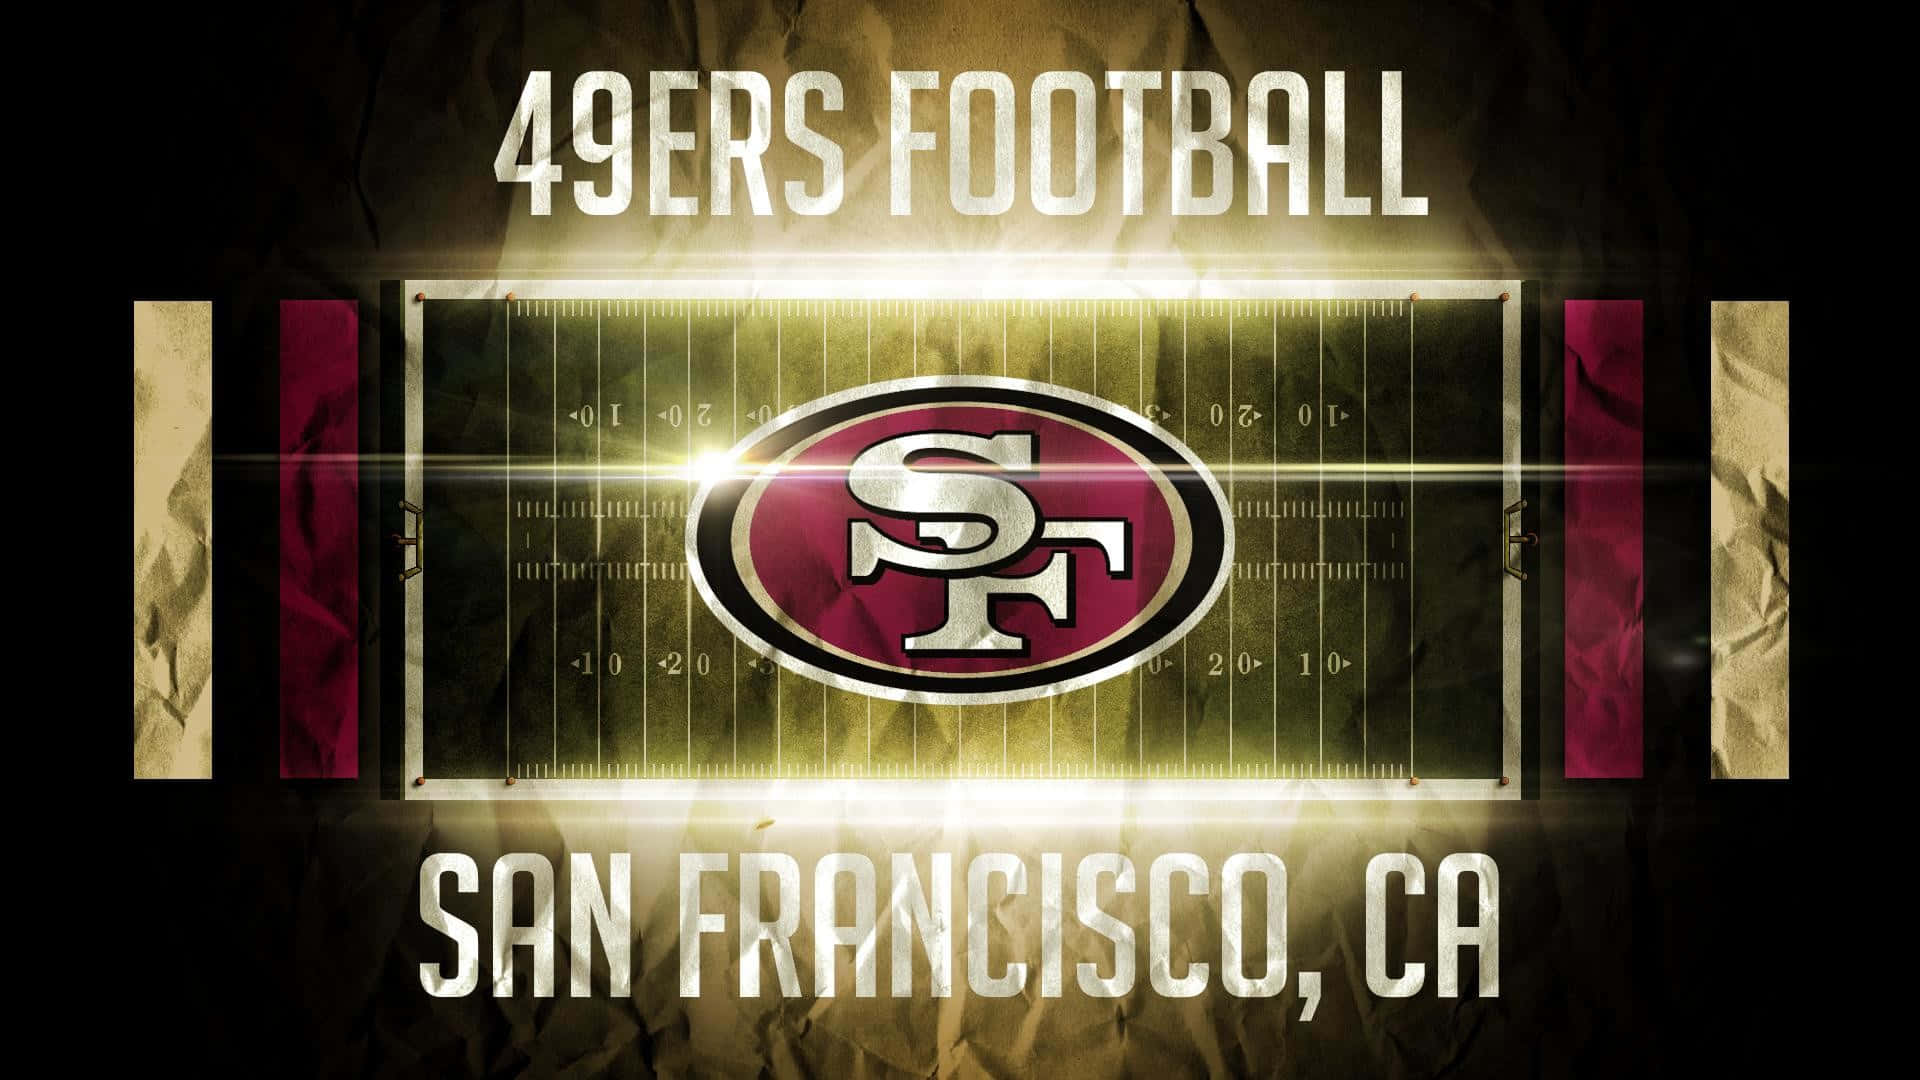 Celebrate in San Francisco with the 49ers